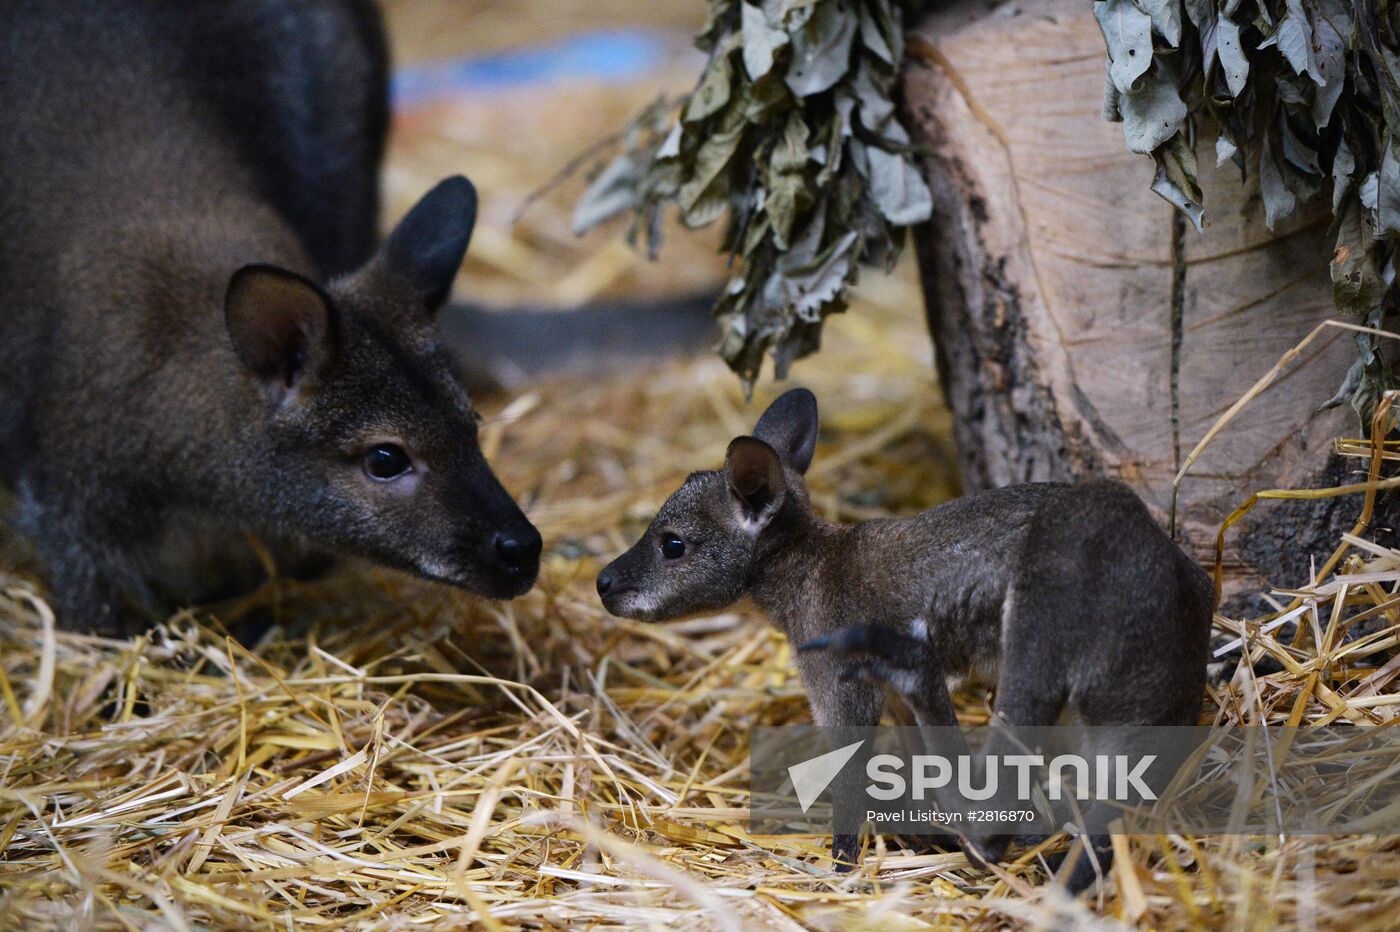 New addition to family of tree-kangaroos in Yekaterinburg Zoo